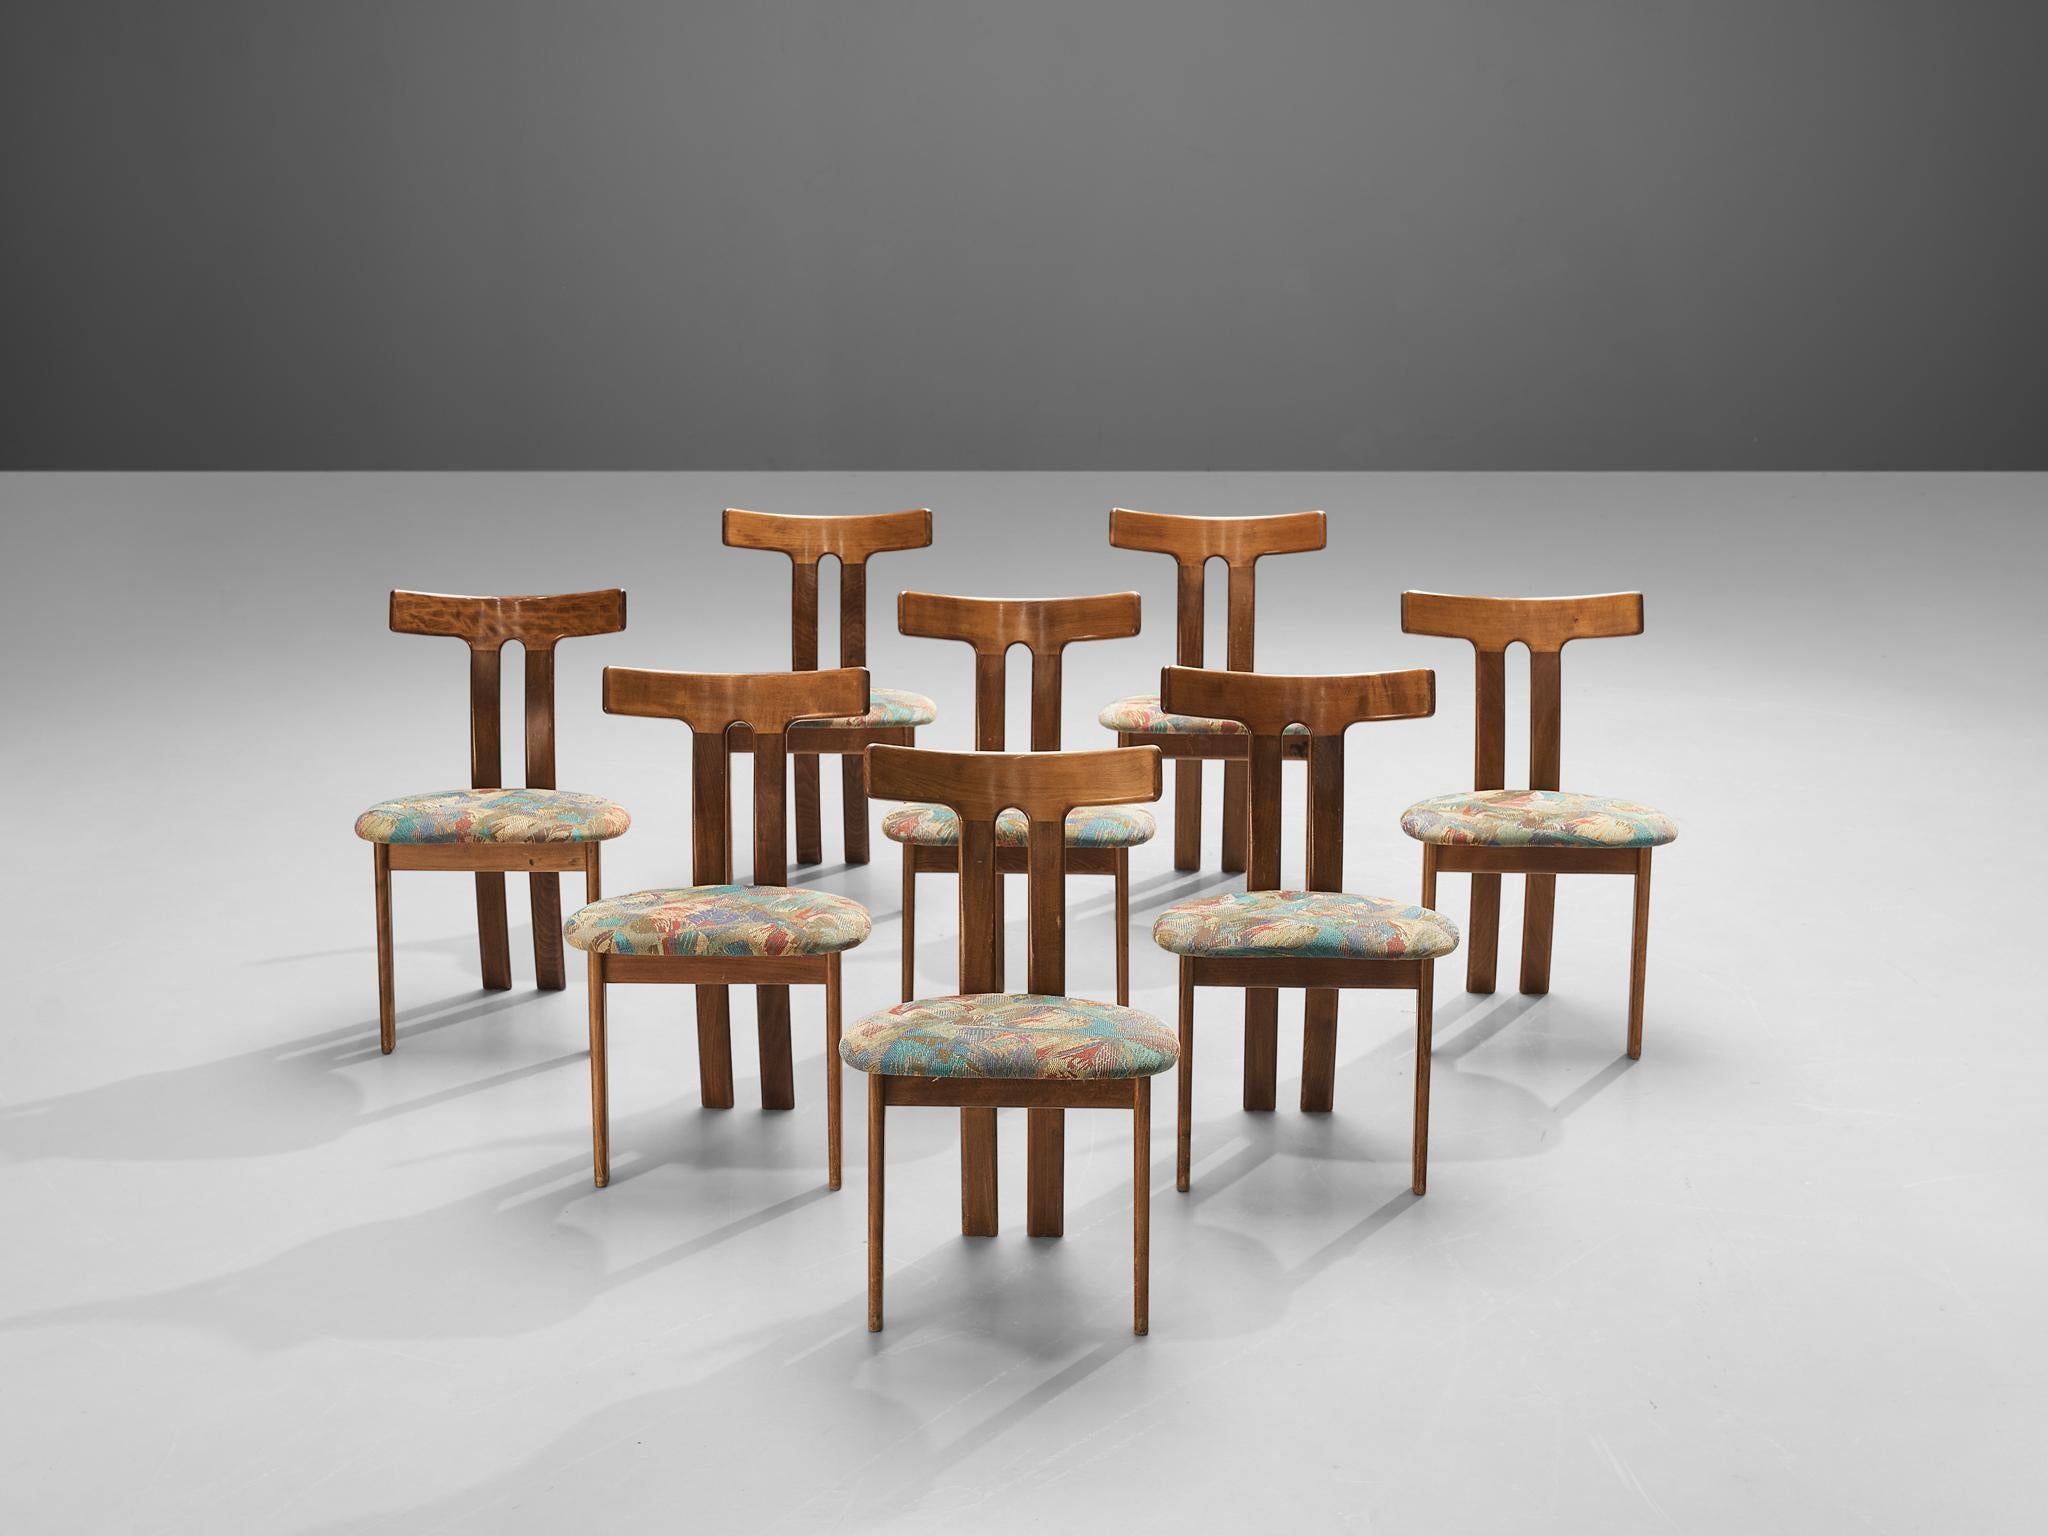 Set of 8 Danish dining chairs, wood, fabric upholstery, Denmark, 1960s

Danish Dining chairs designed in the 1960s. The wonderful T-shaped backrest has a strong expression. From the horizontal backrest the two vertical legs run downwards. Due to the